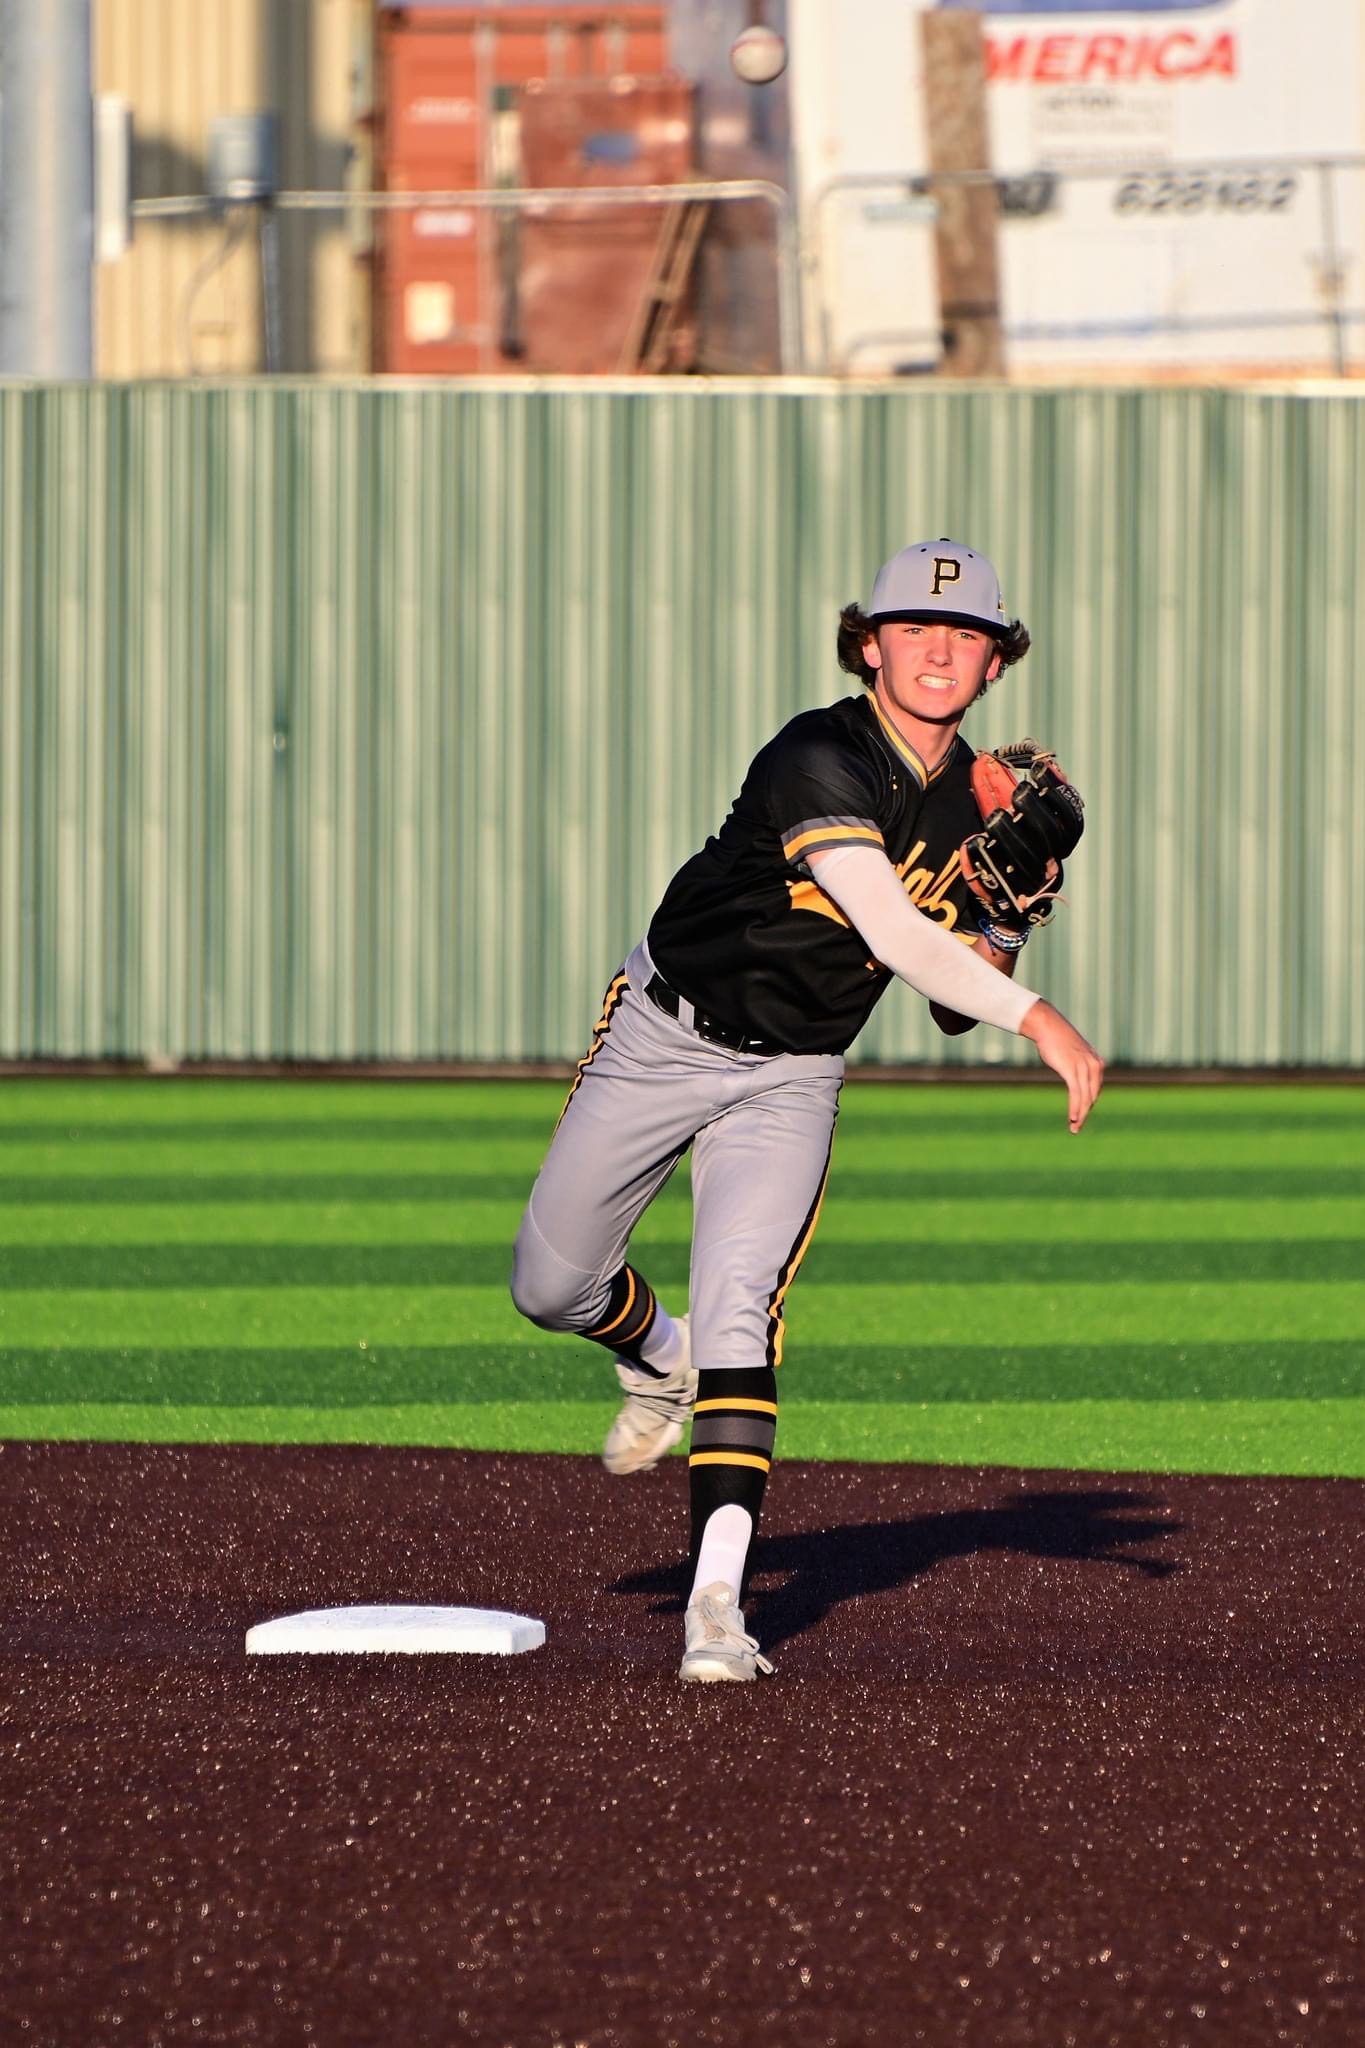 Check out the photos and videos of the baseball recruiting profile Brayson Moore